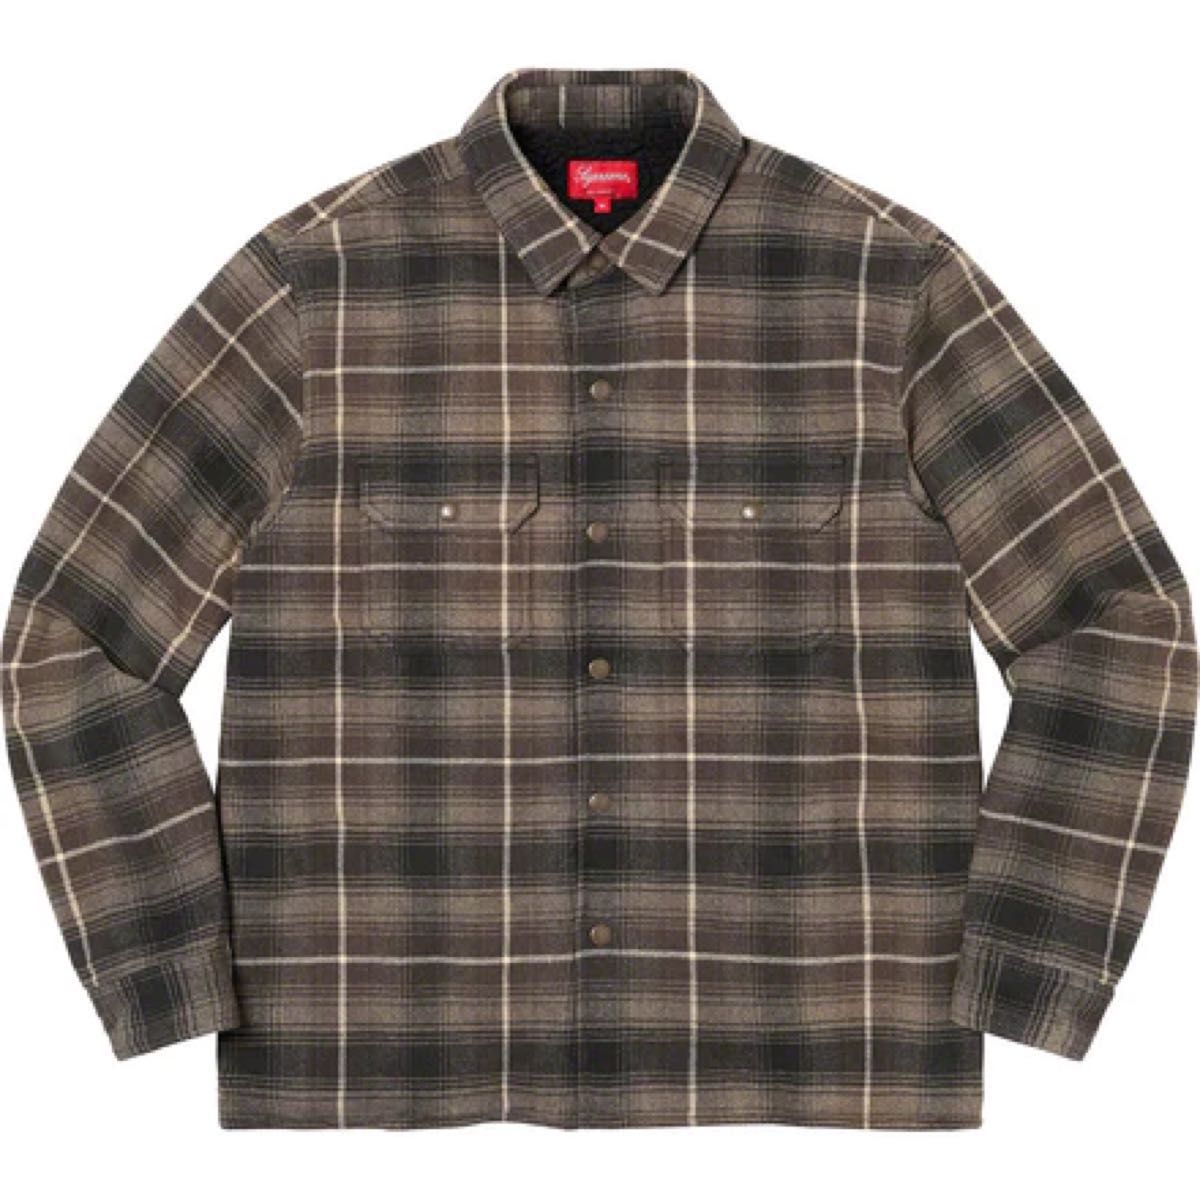 Supreme UNDERCOVER S/S Flannel Shirt Red Plaid S シュプリーム